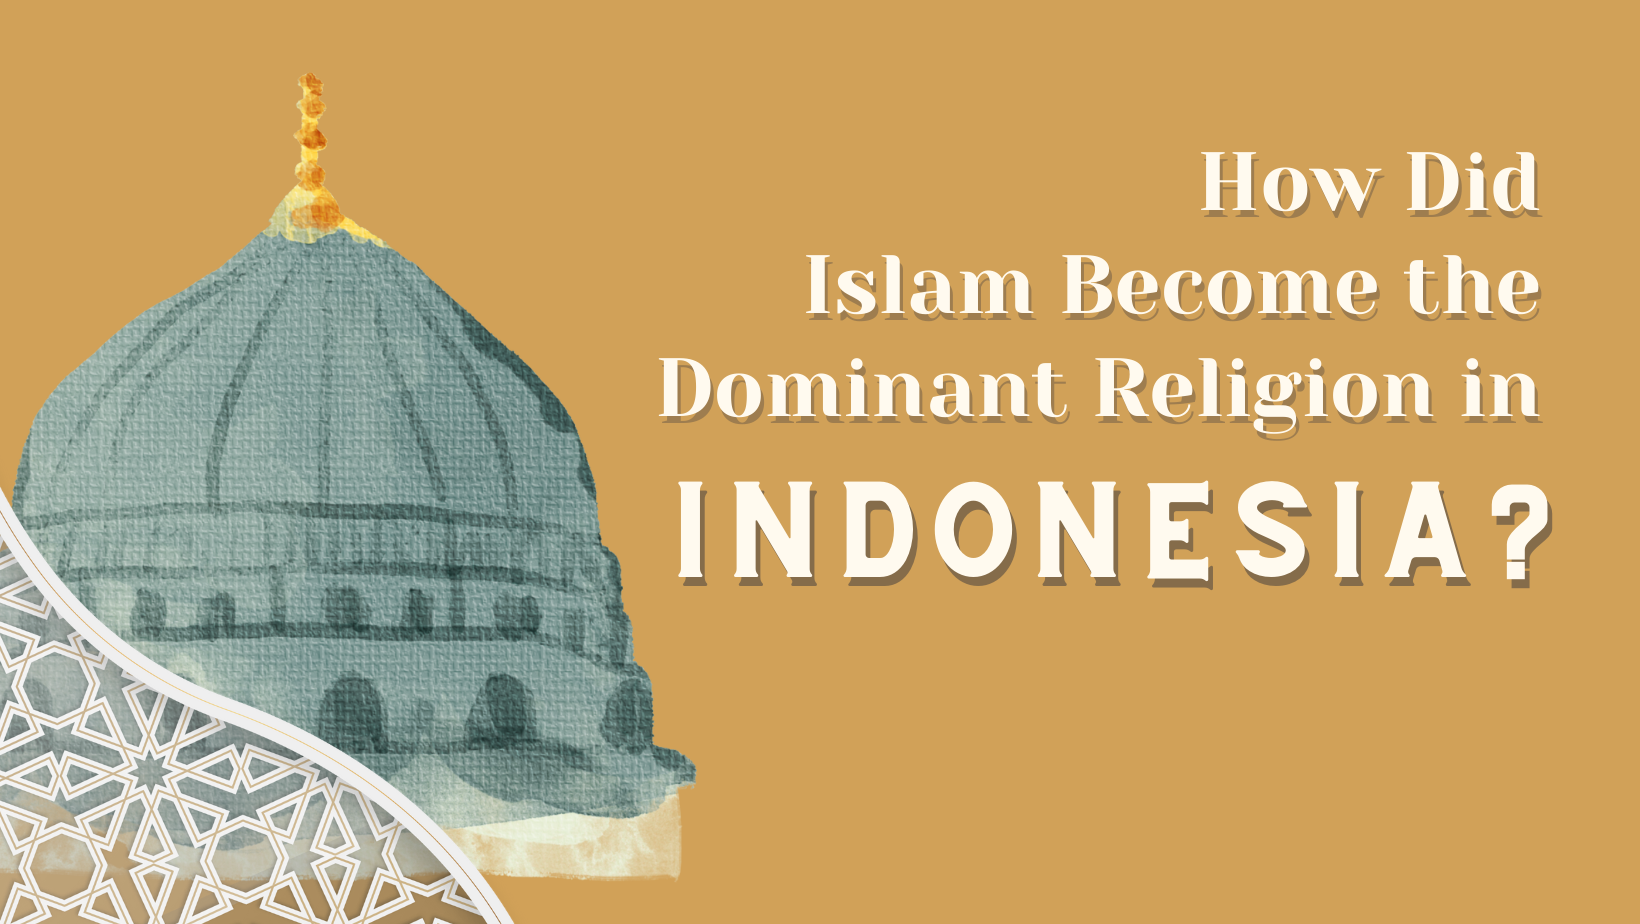 How Did Islam Become the Dominant Religion in Indonesia